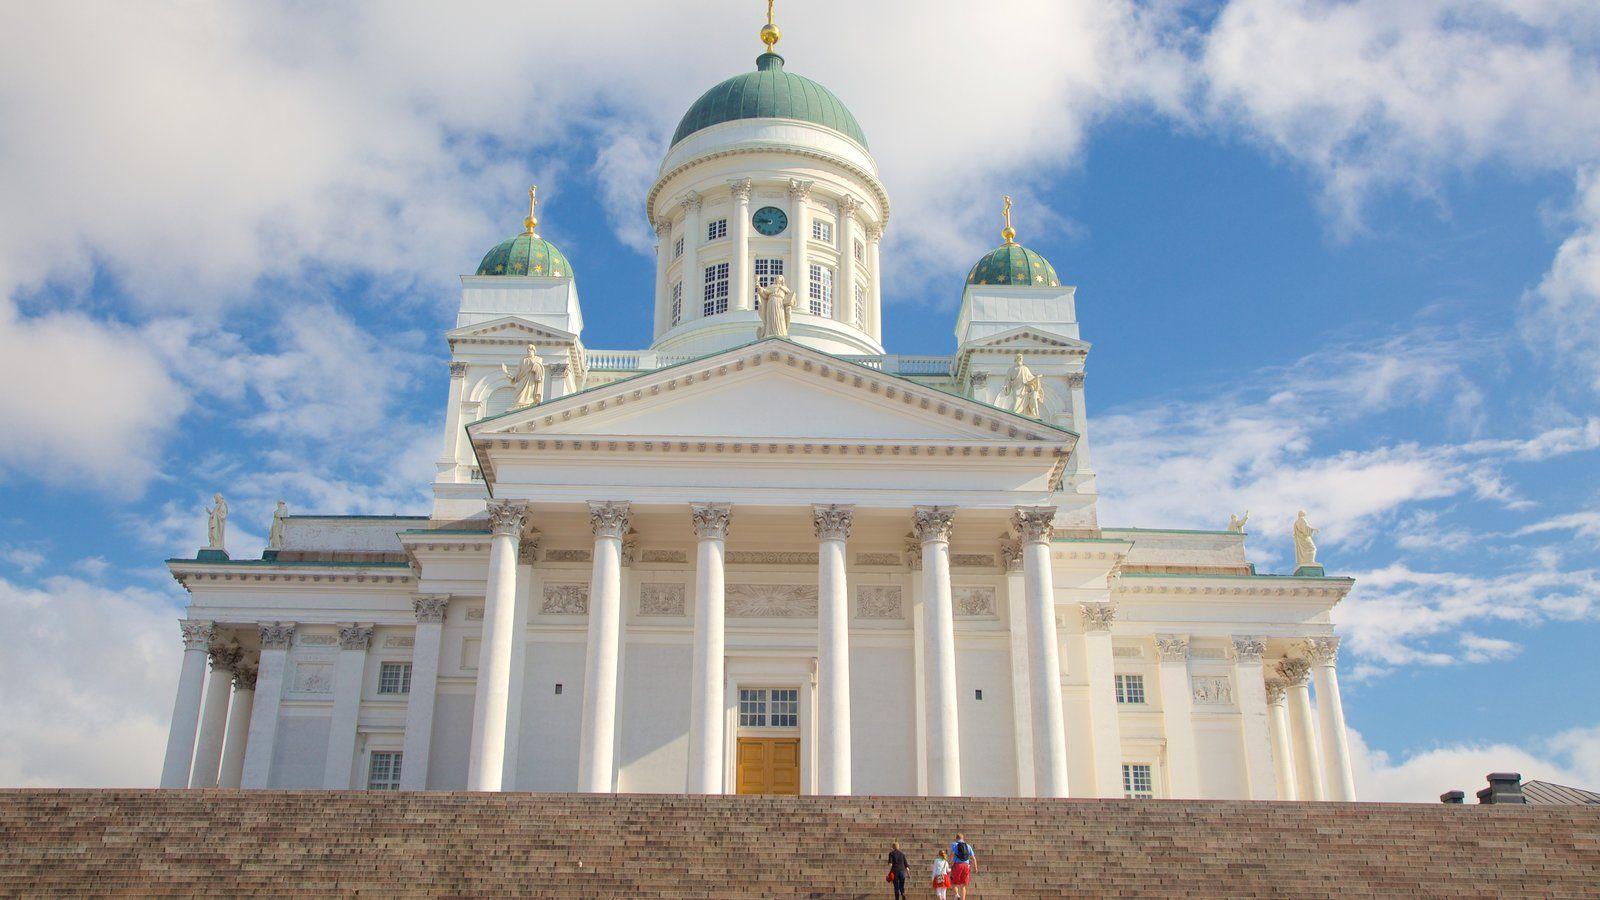 Helsinki Cathedral Picture: View Photo & Image of Helsinki Cathedral